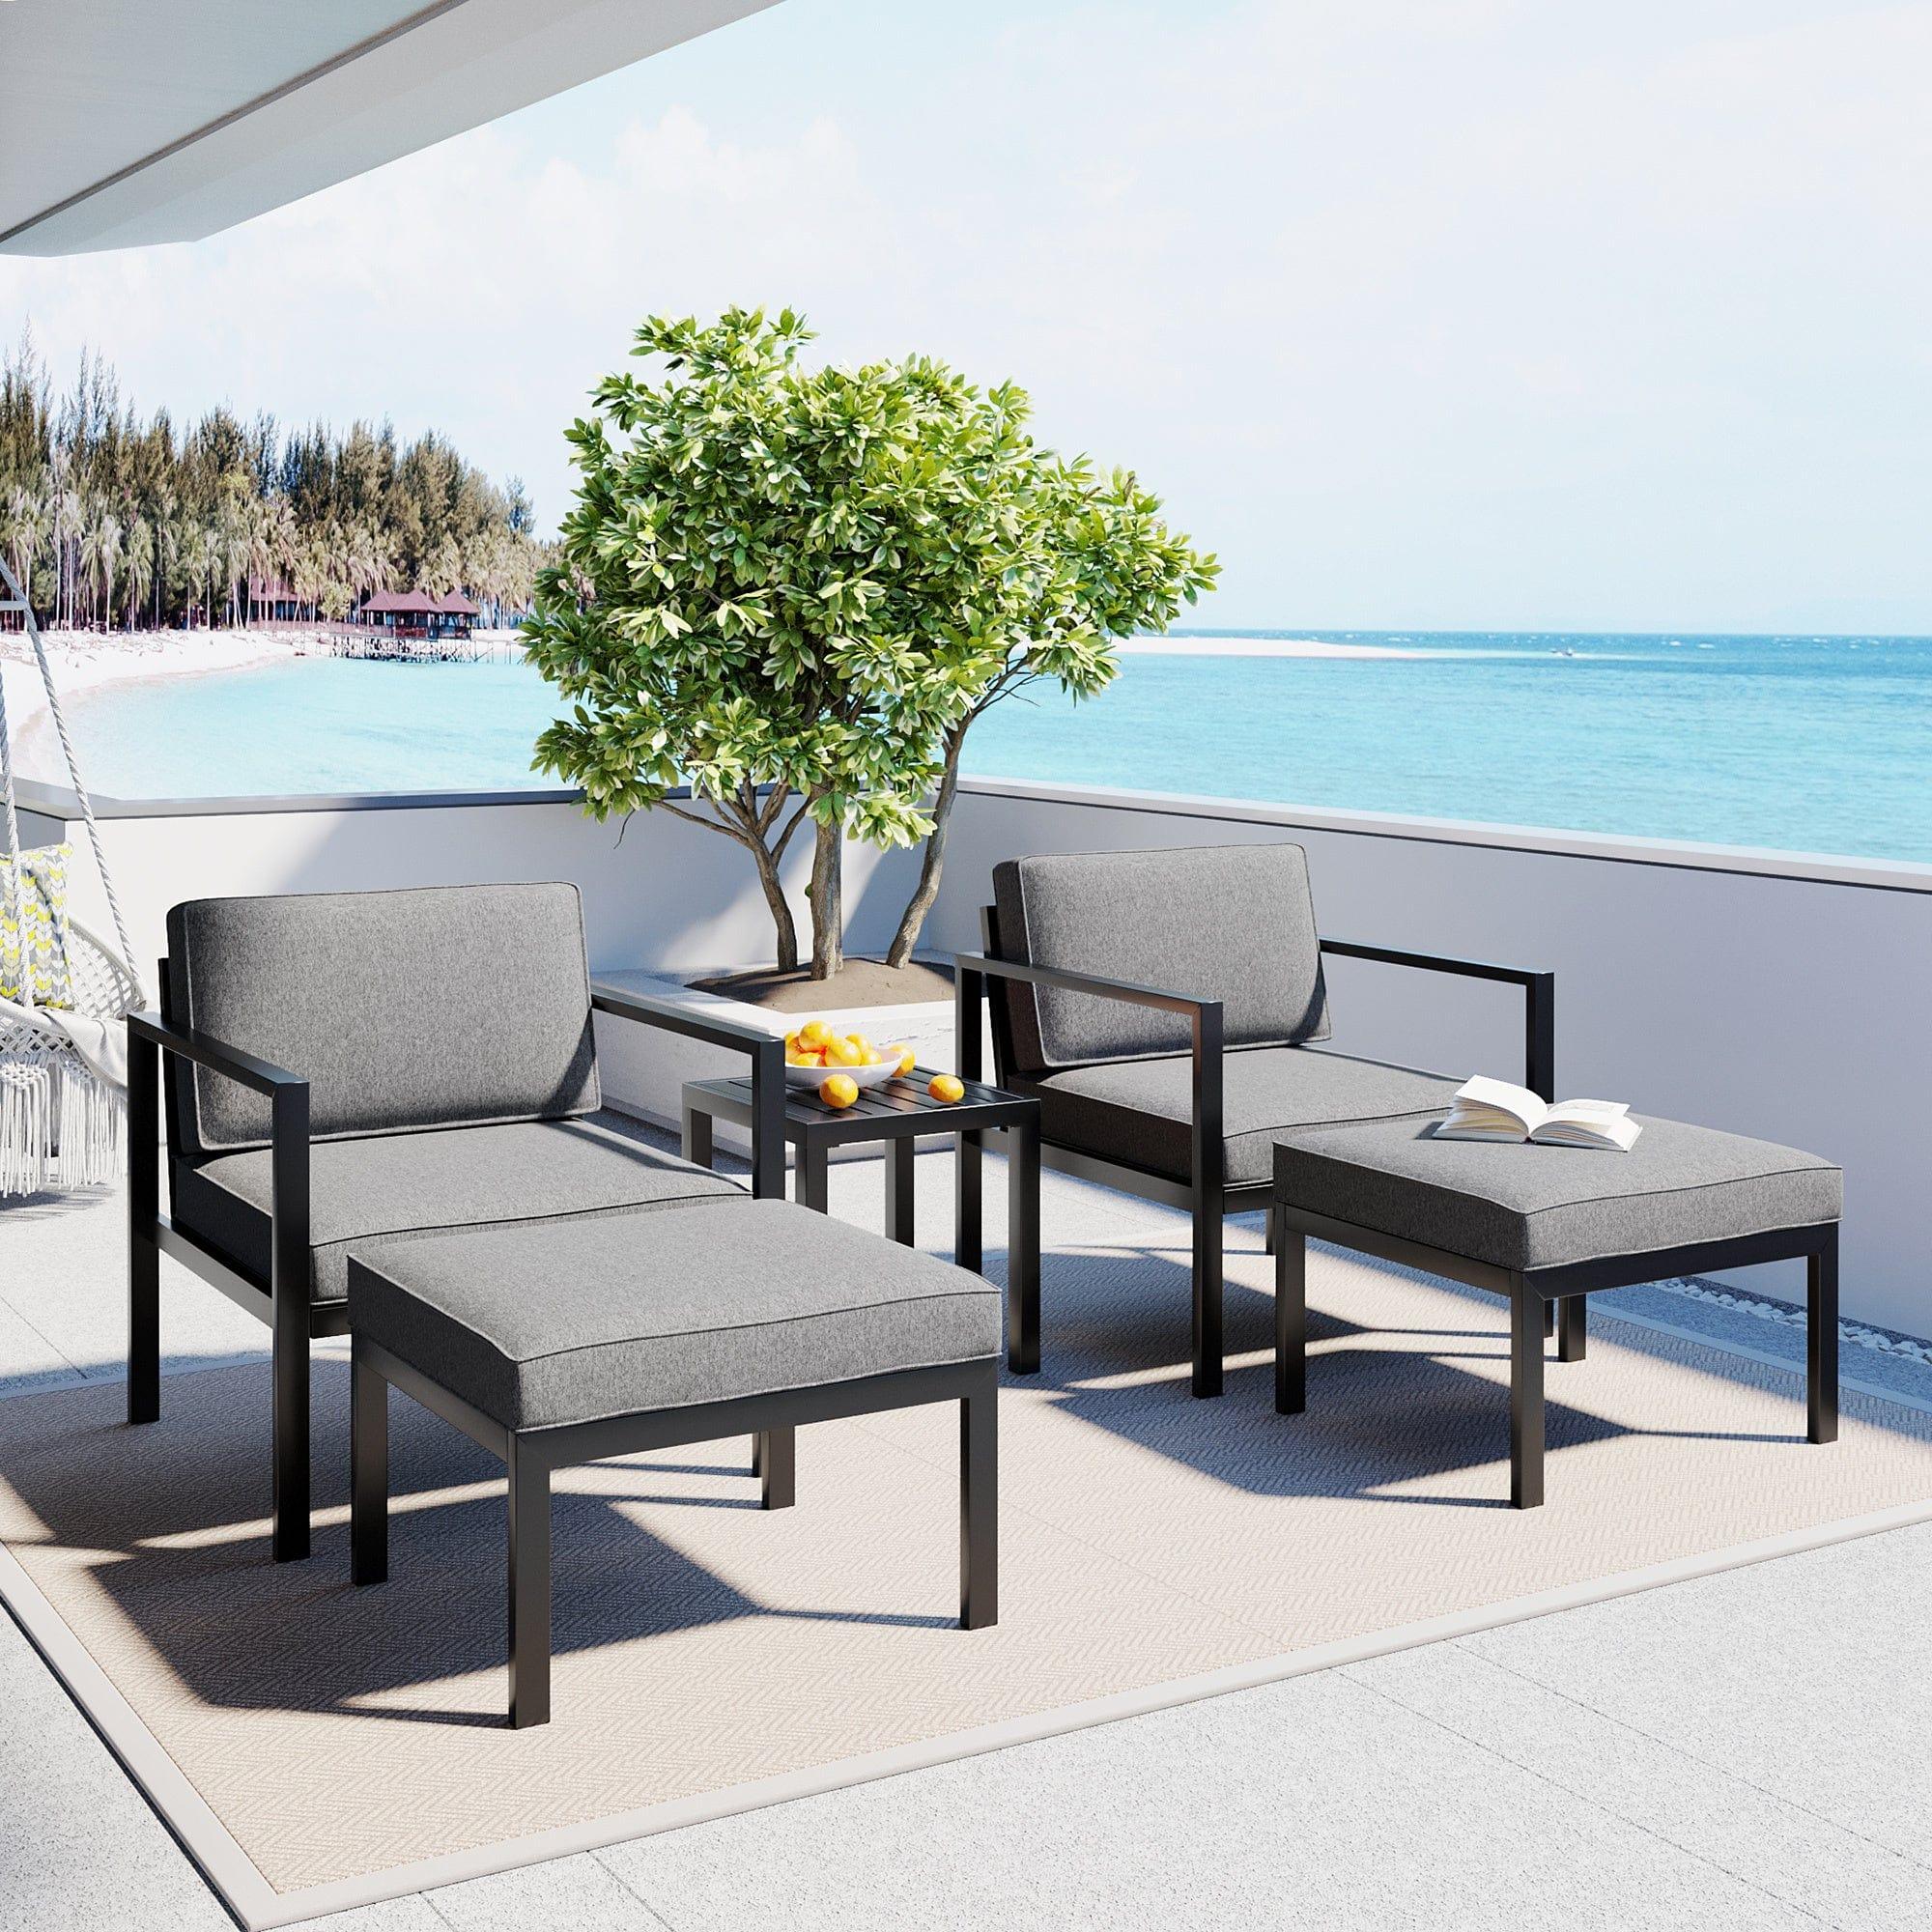 Shop TOPMAX Outdoor Patio 5-piece Aluminum Alloy Conversation Set Sofa Set with Coffee Table and Stools for Poolside, Garden,Black Frame+Gray Cushion Mademoiselle Home Decor